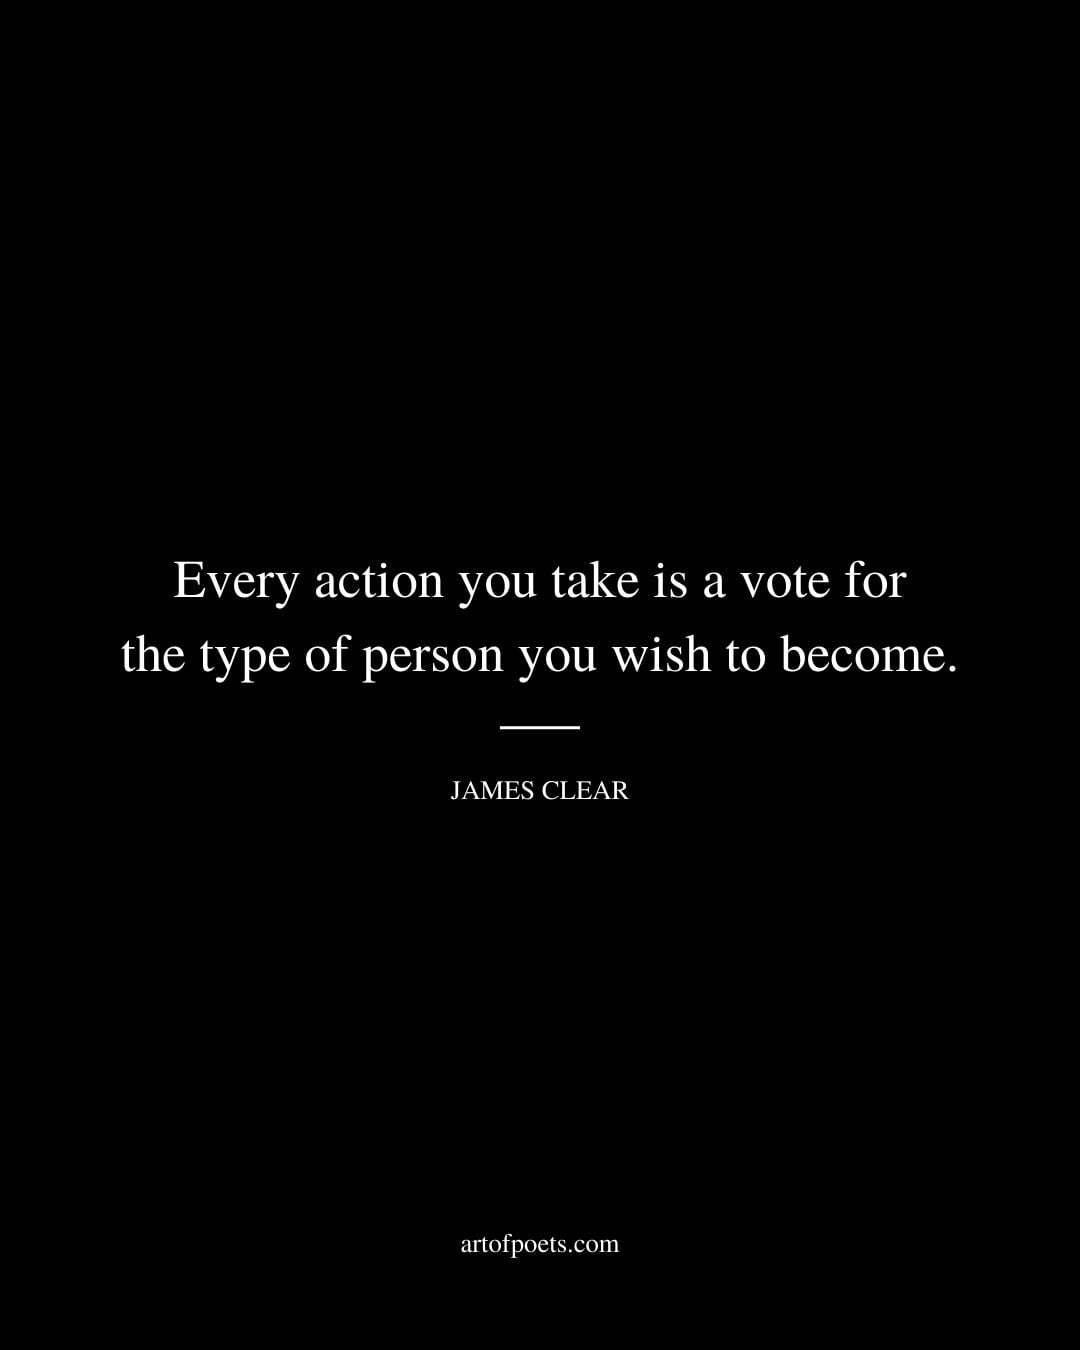 Every action you take is a vote for the type of person you wish to become